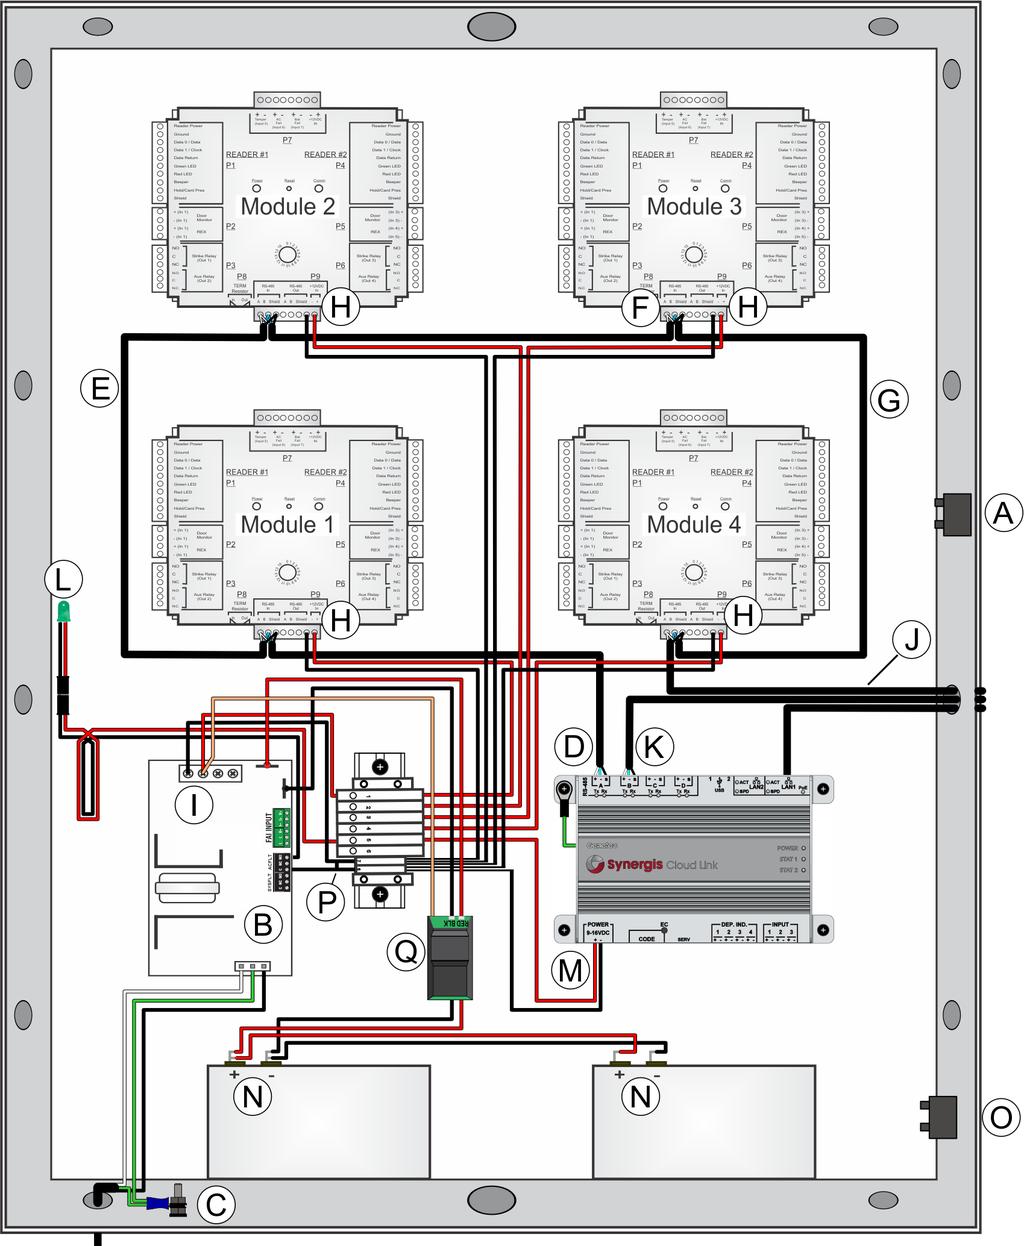 Synergis enclosure wiring Synergis wiring diagram: 4 HID modules with Synergis Cloud Link, fuse assembly, and power supply Before installing the Synergis enclosure and its components,